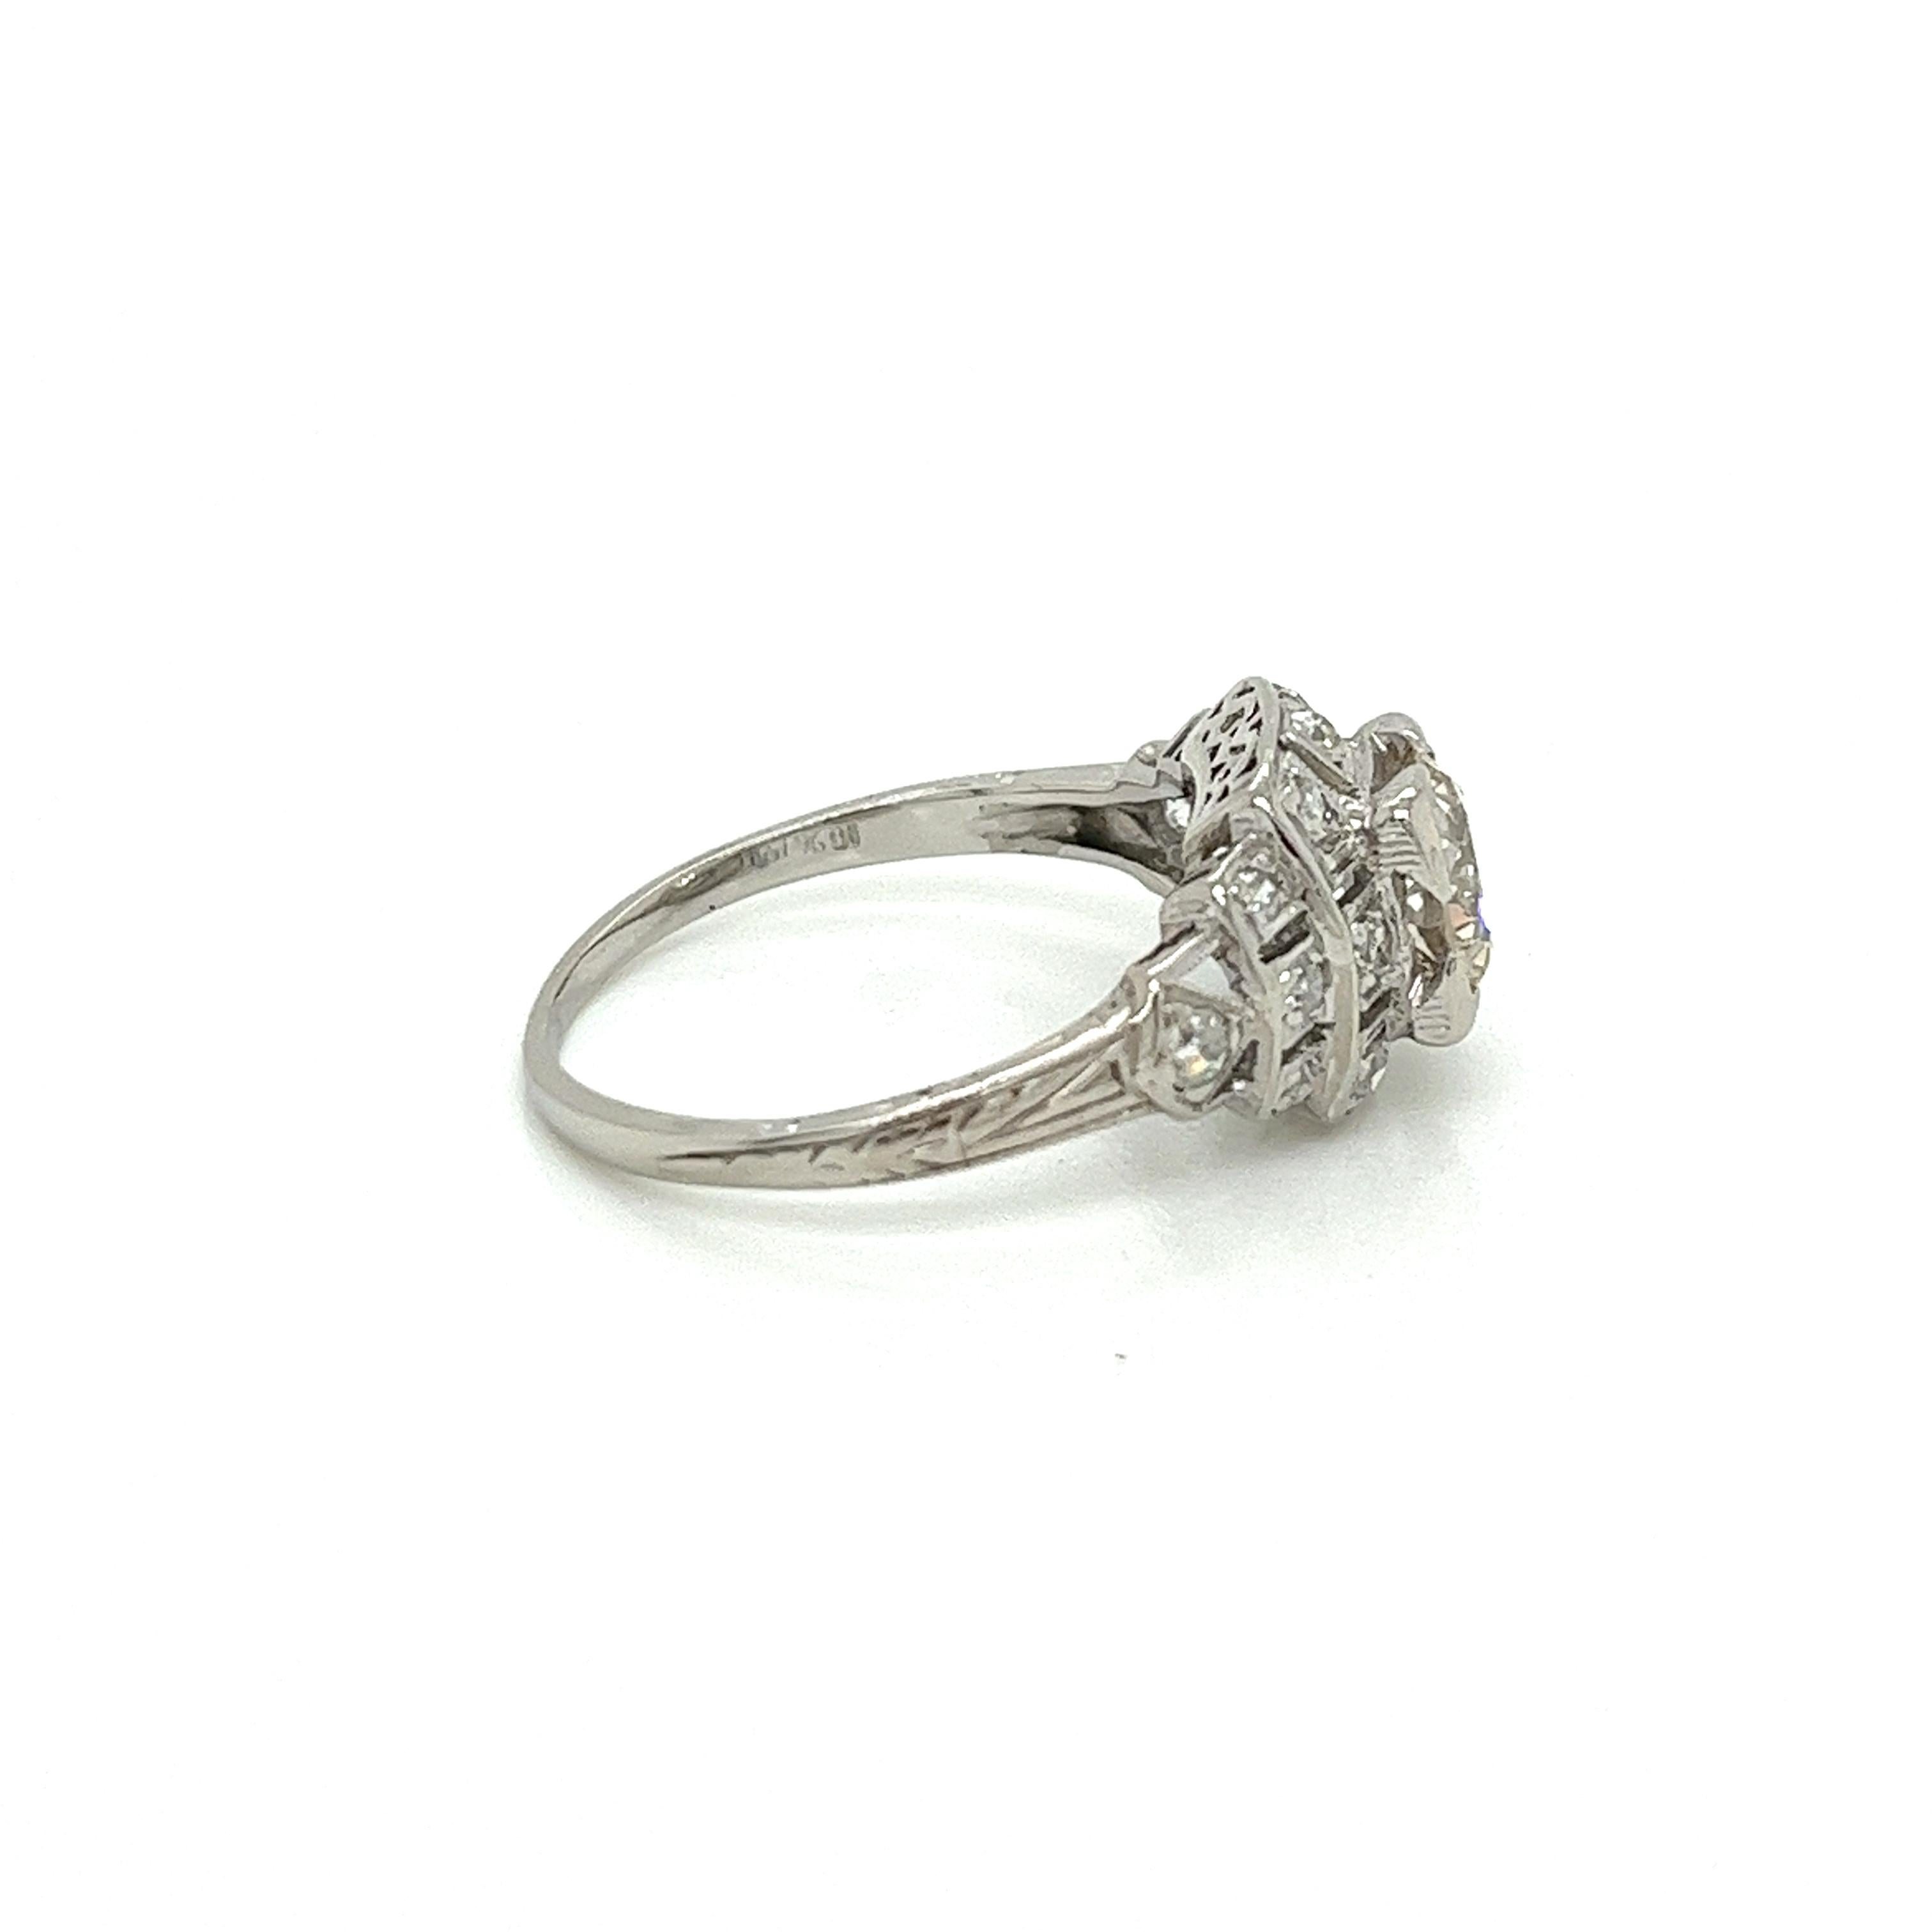 Vintage 1920s Art Deco Platinum Diamond Engagement Ring .82ct In Good Condition For Sale In Boston, MA